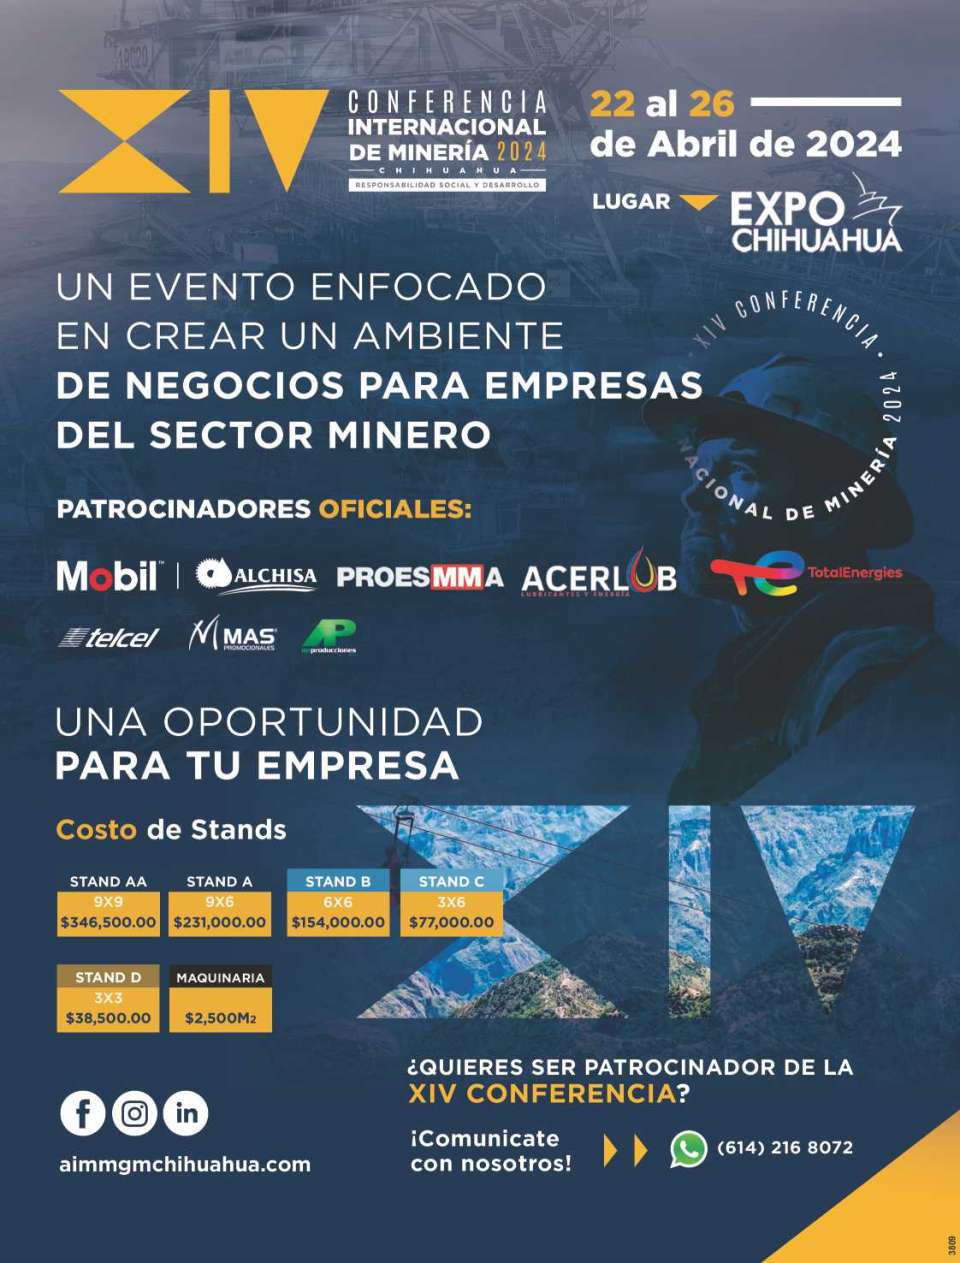 Mining Conference and Exhibit in Chihuahua, Mexico, April 22-26, 2024